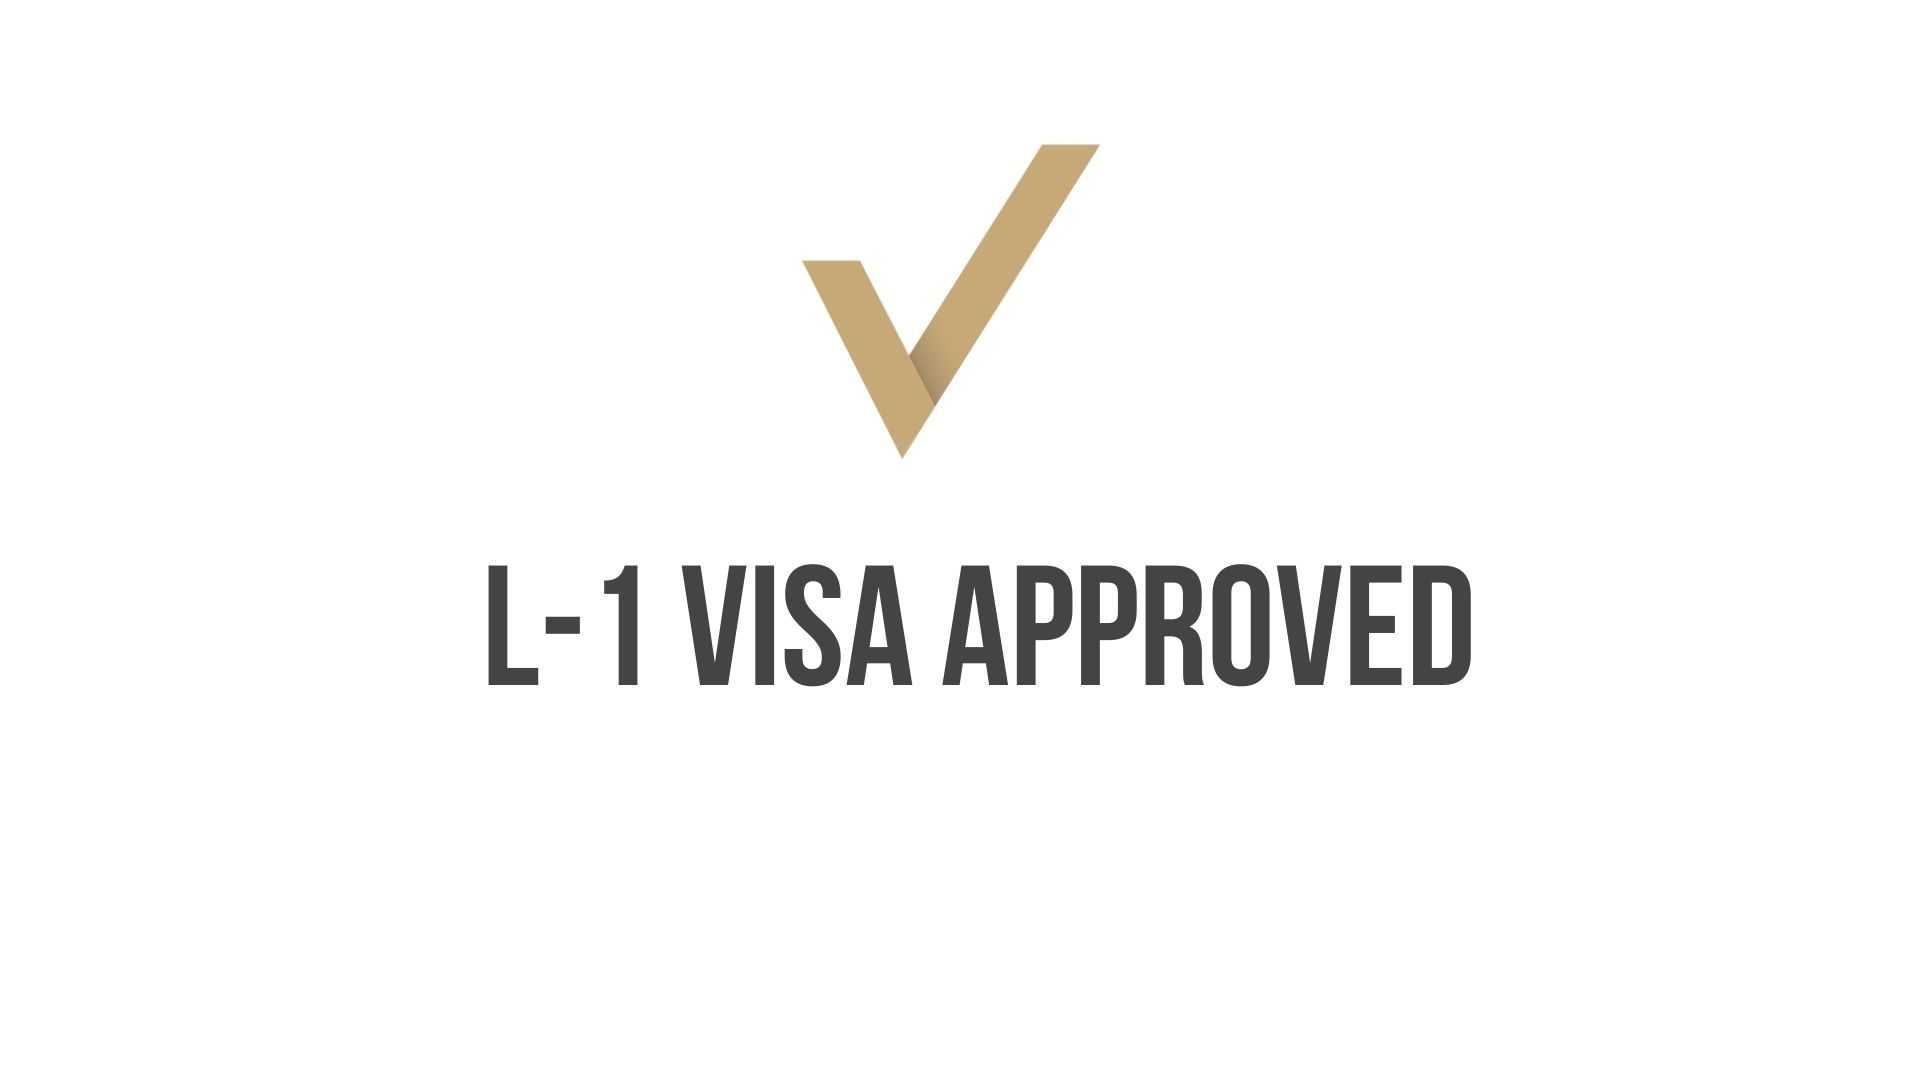 L-1 Visa Approval for Application Engineering Manager